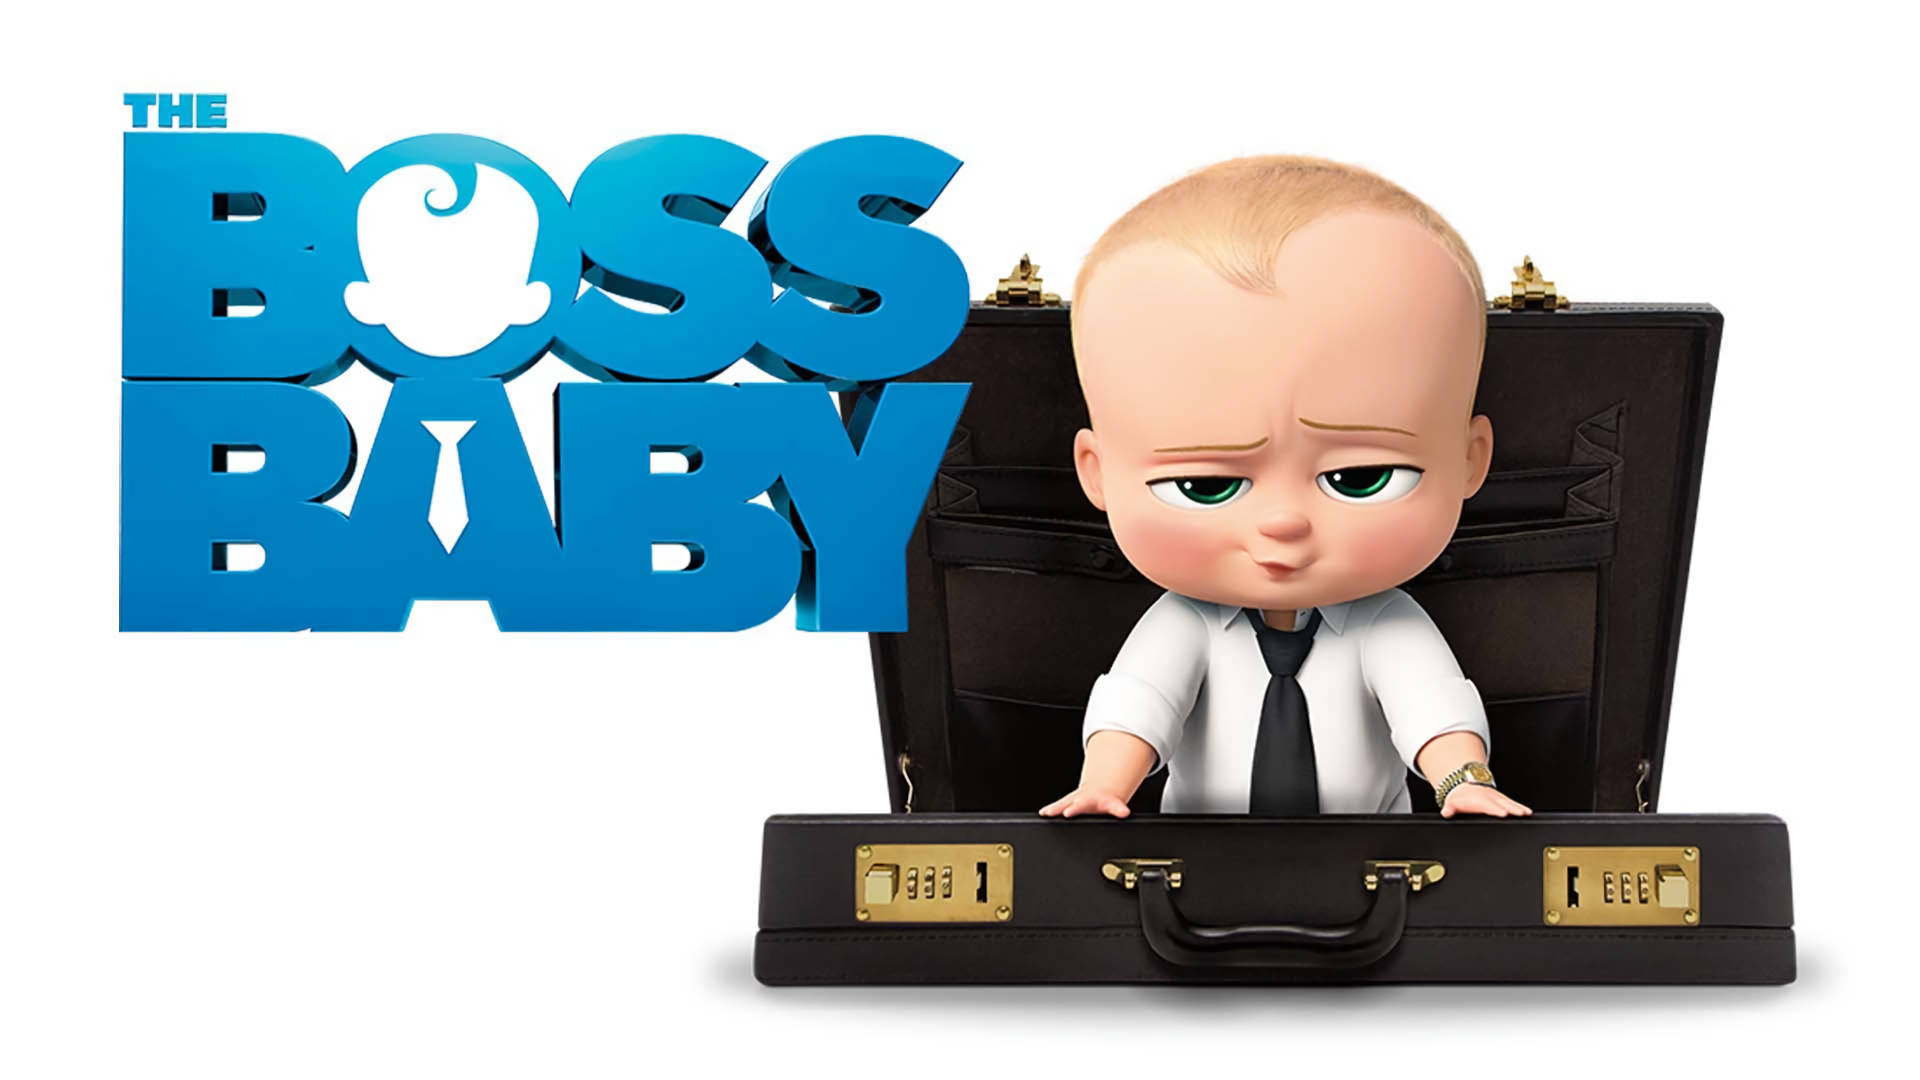 The Boss Baby In Briefcase Background